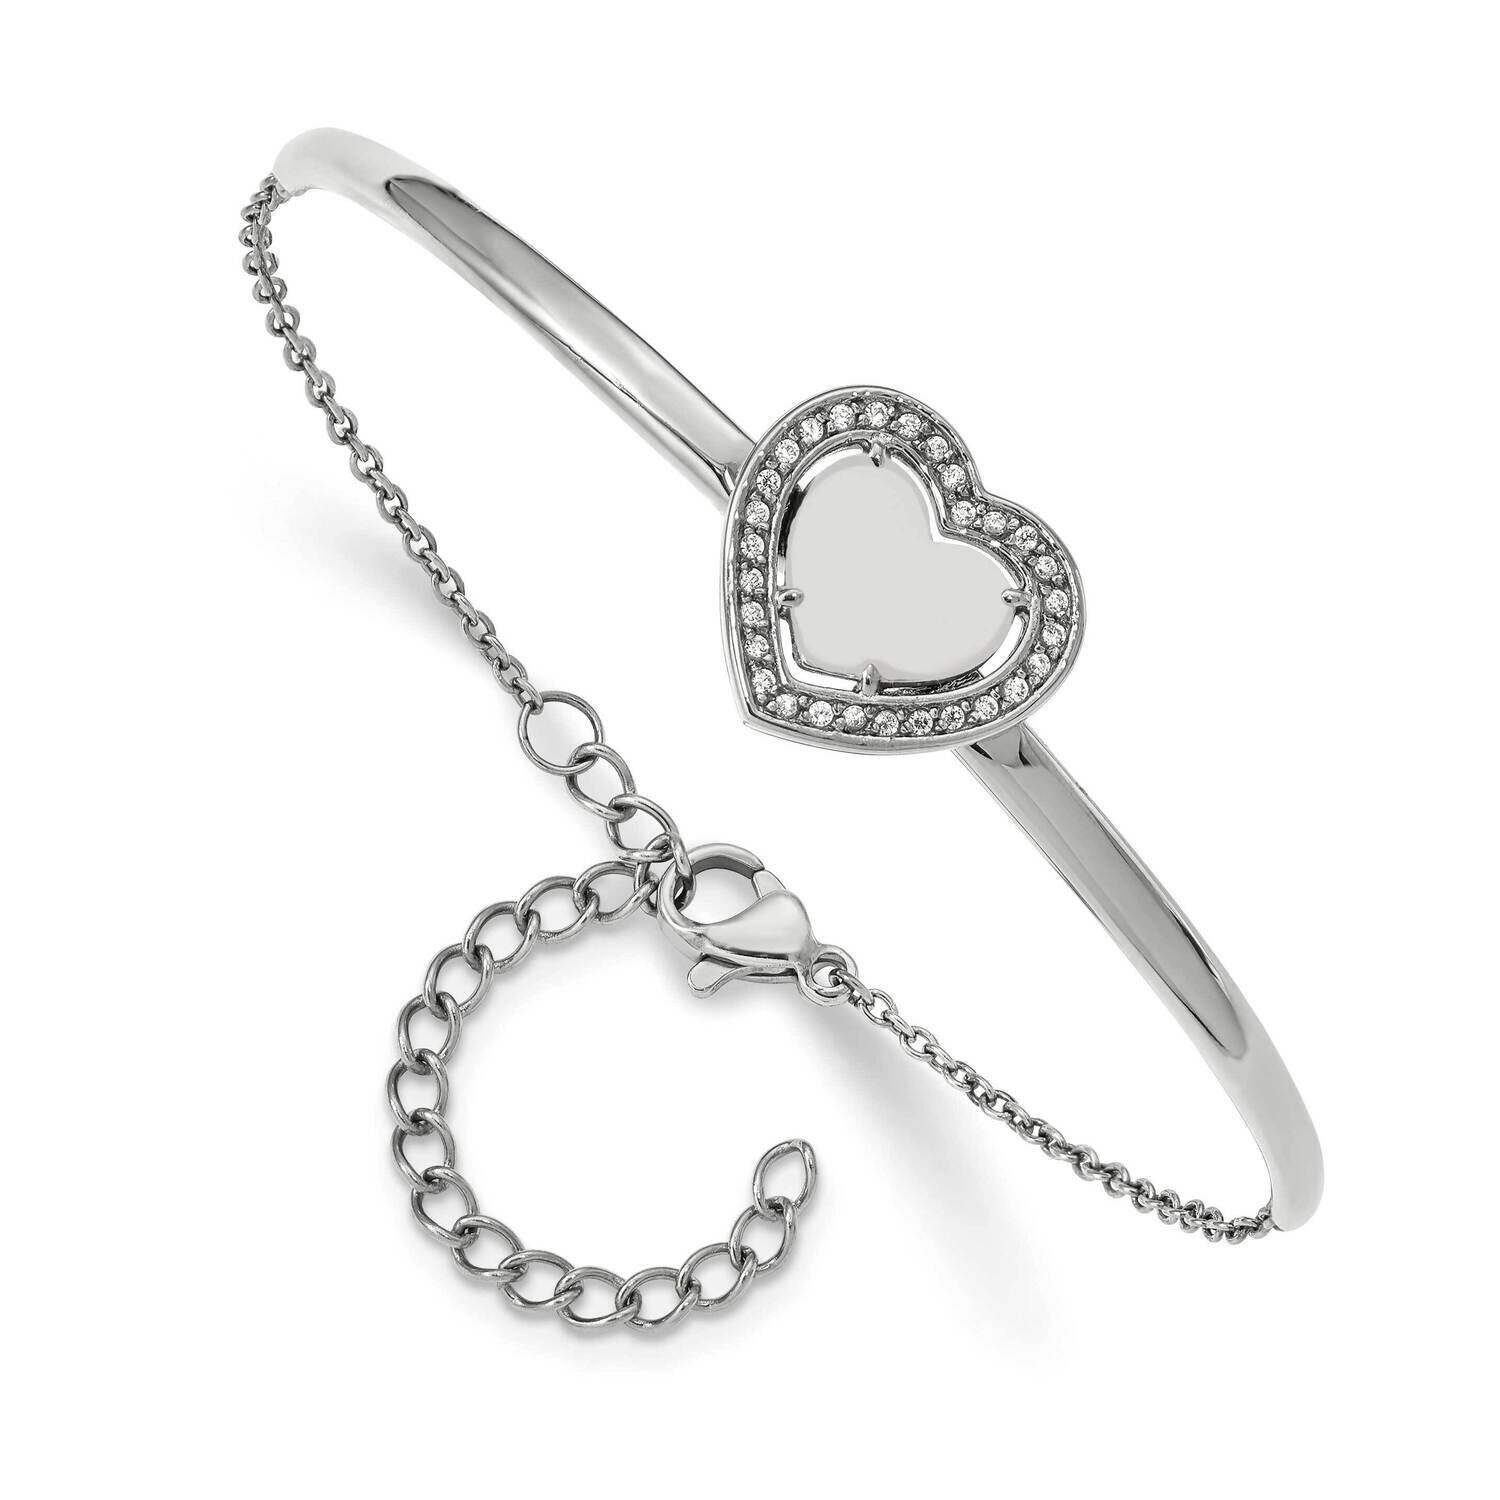 Cz Heart 6.5 Inch 2 Inch Extension Bar Bracelet Stainless Steel Polished SRB2559-6.5